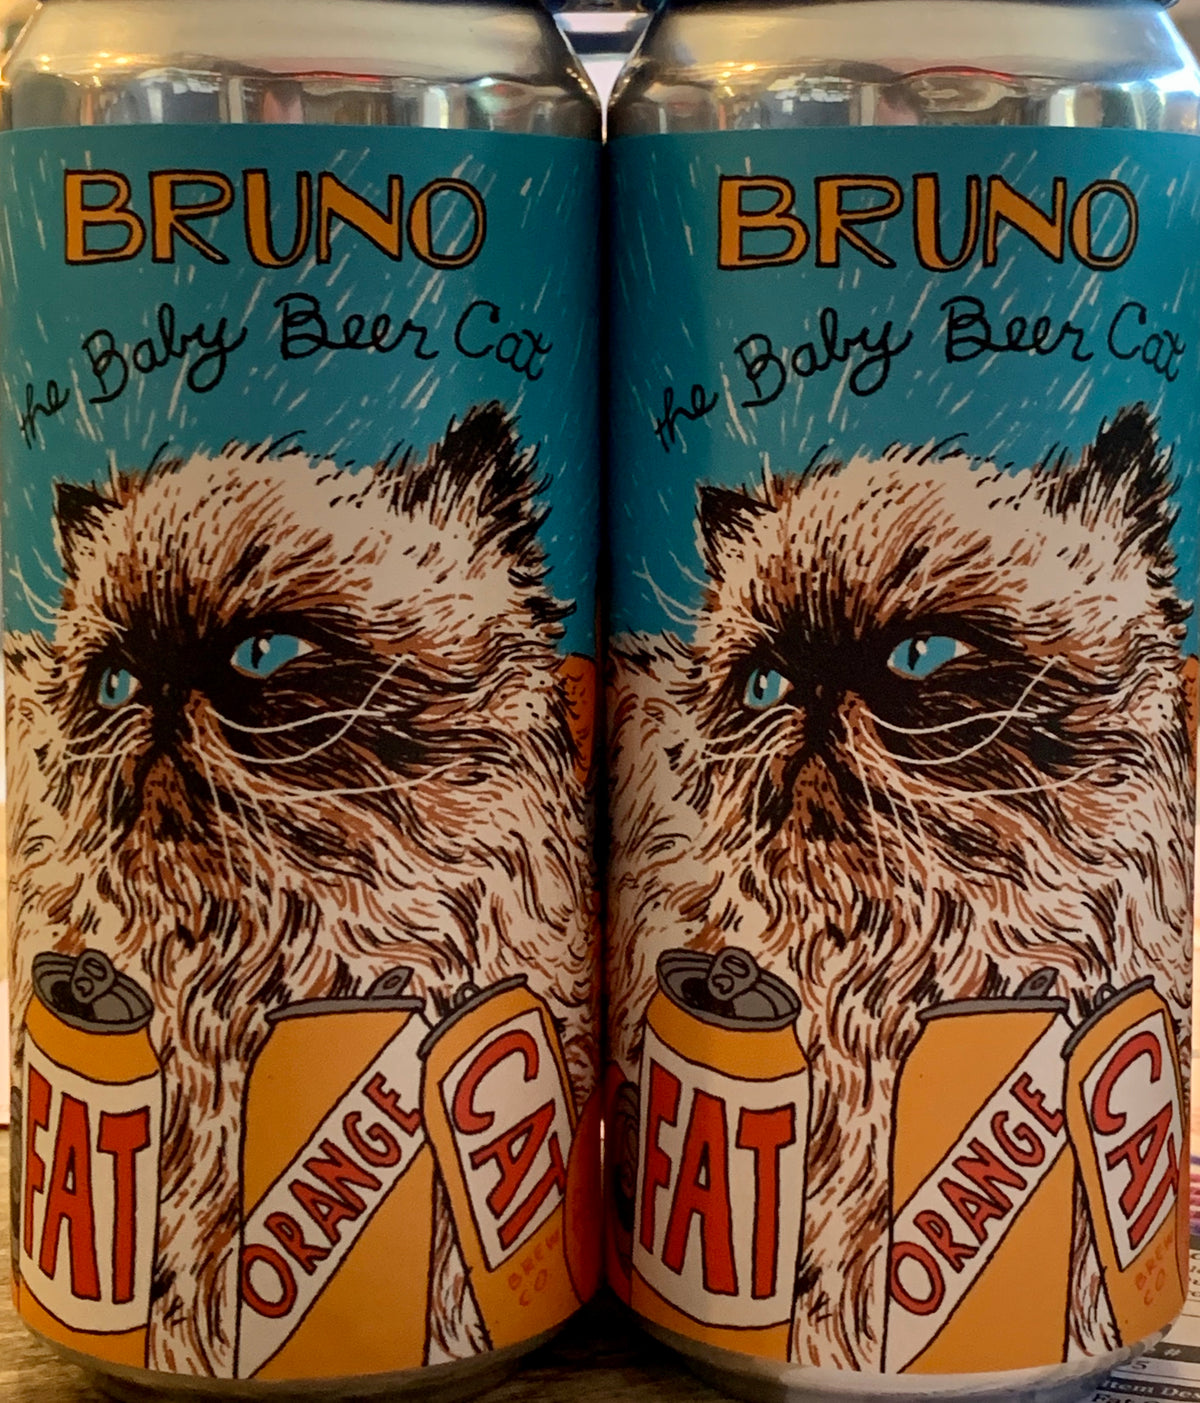 Fat Cat Brewing "Bruno The Baby Beer Cat" NEIPA | The Wise Old Dog